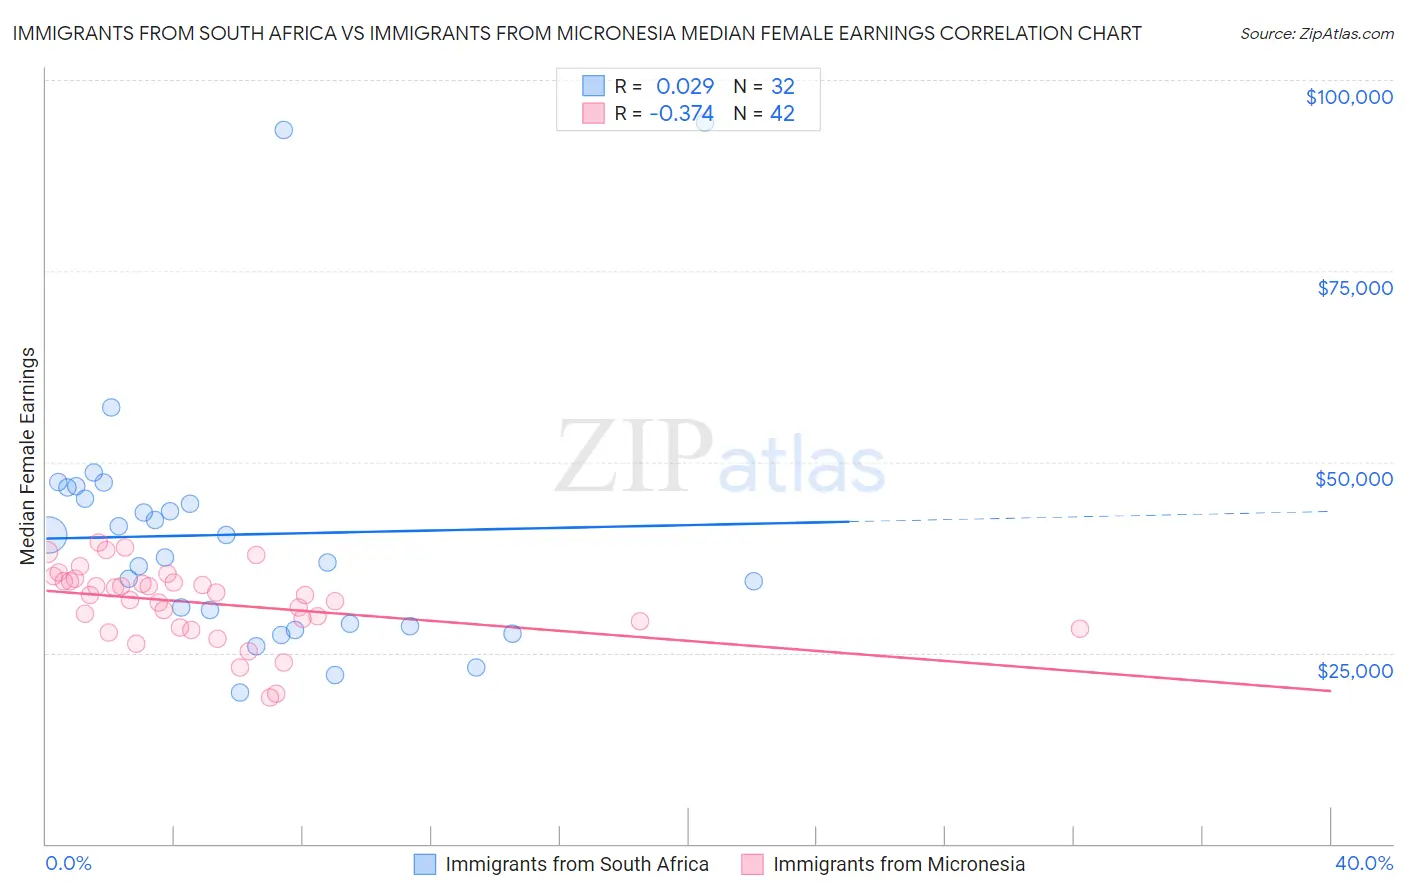 Immigrants from South Africa vs Immigrants from Micronesia Median Female Earnings